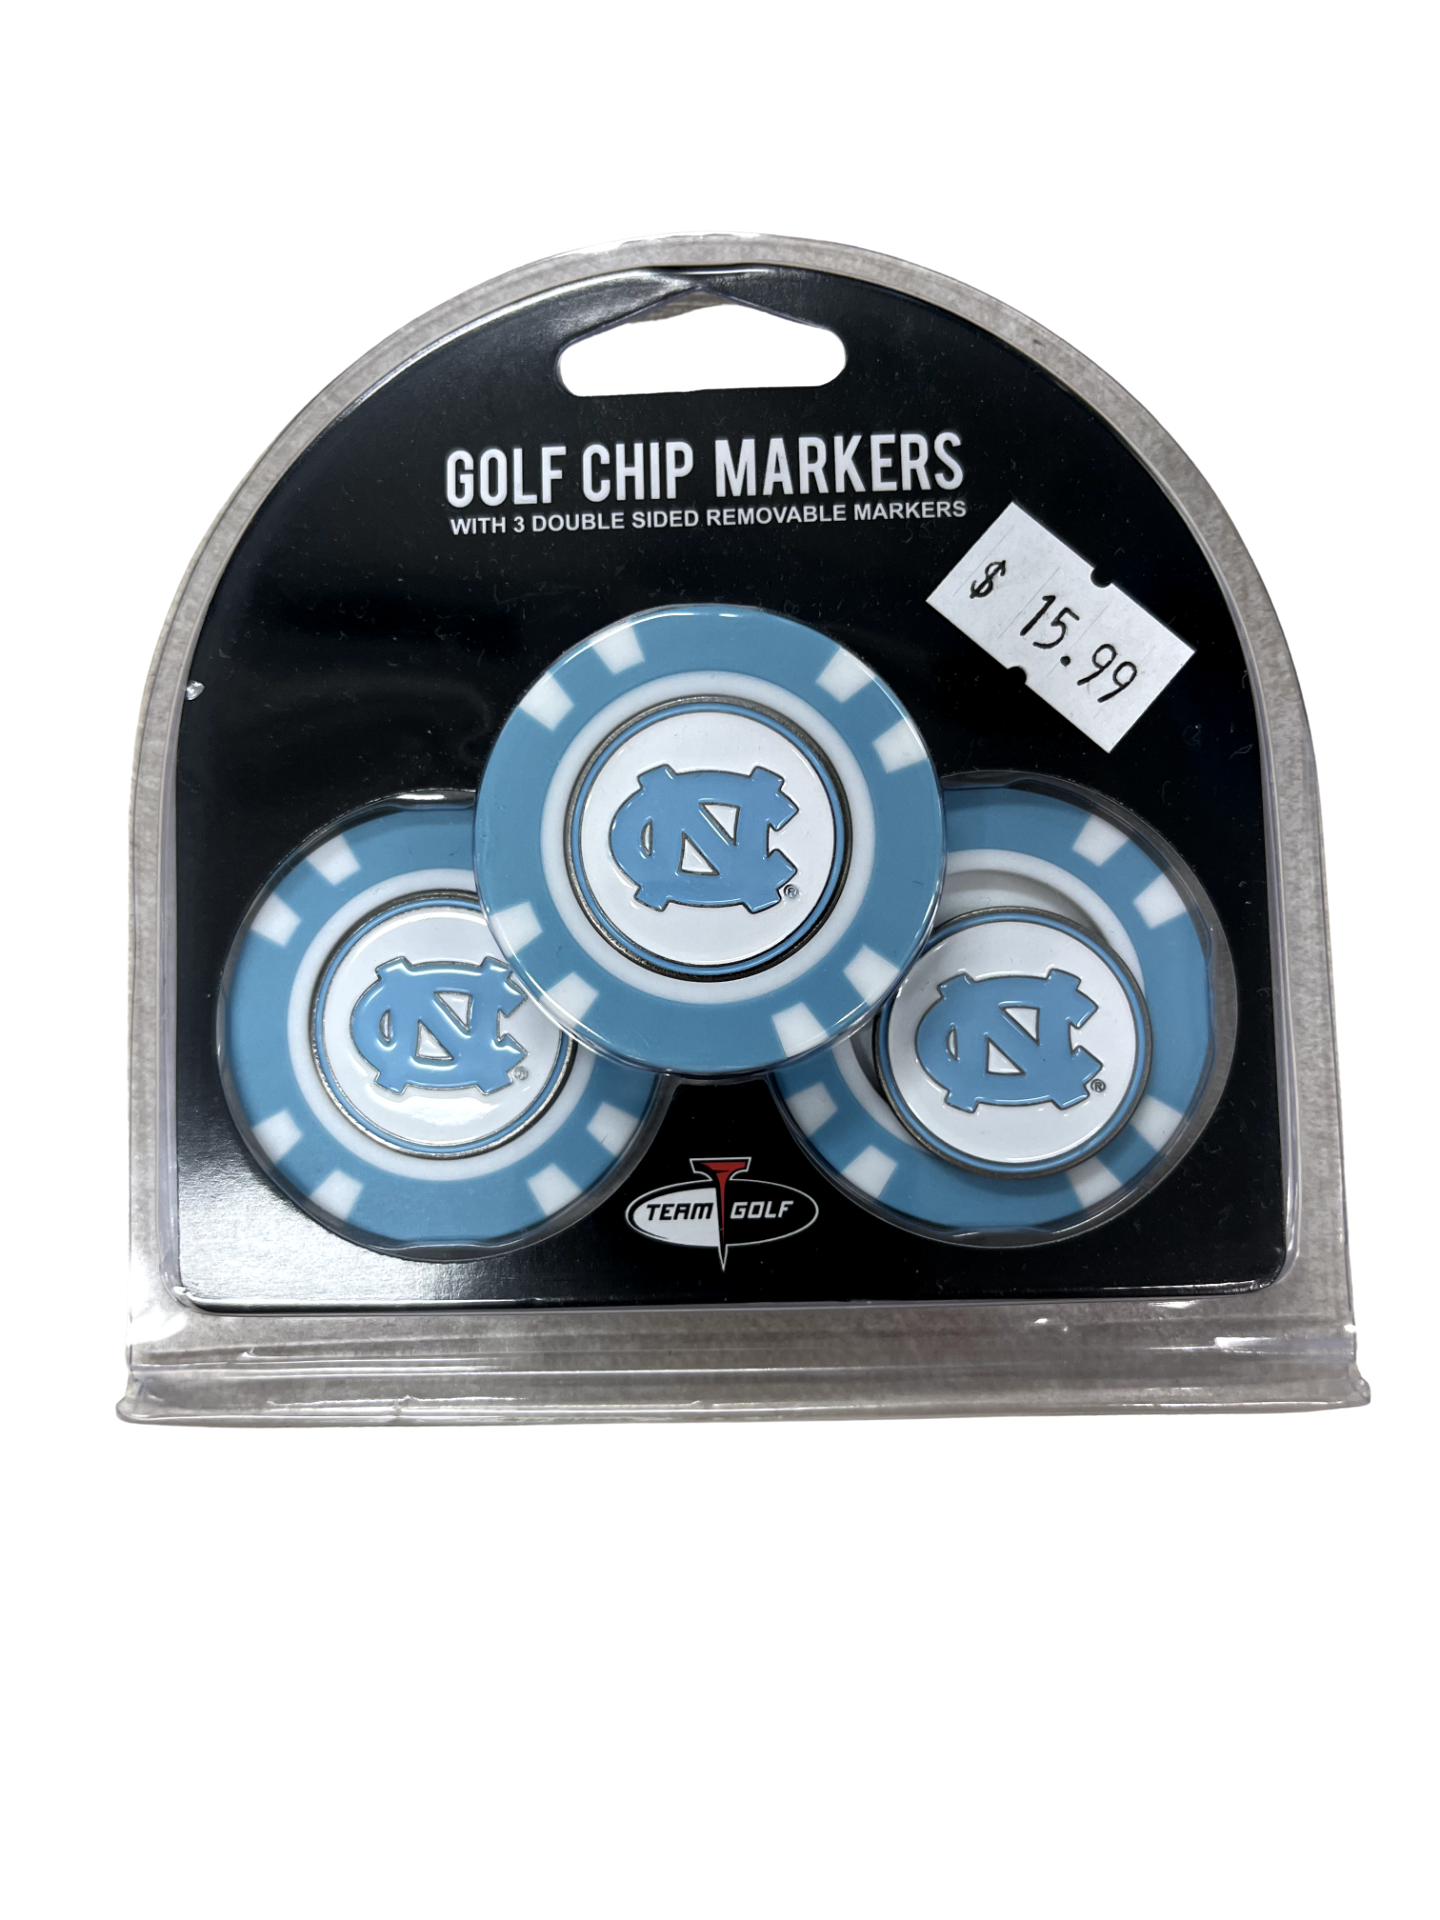 UNC Golf Chip- and Removable Markers 3-Pack